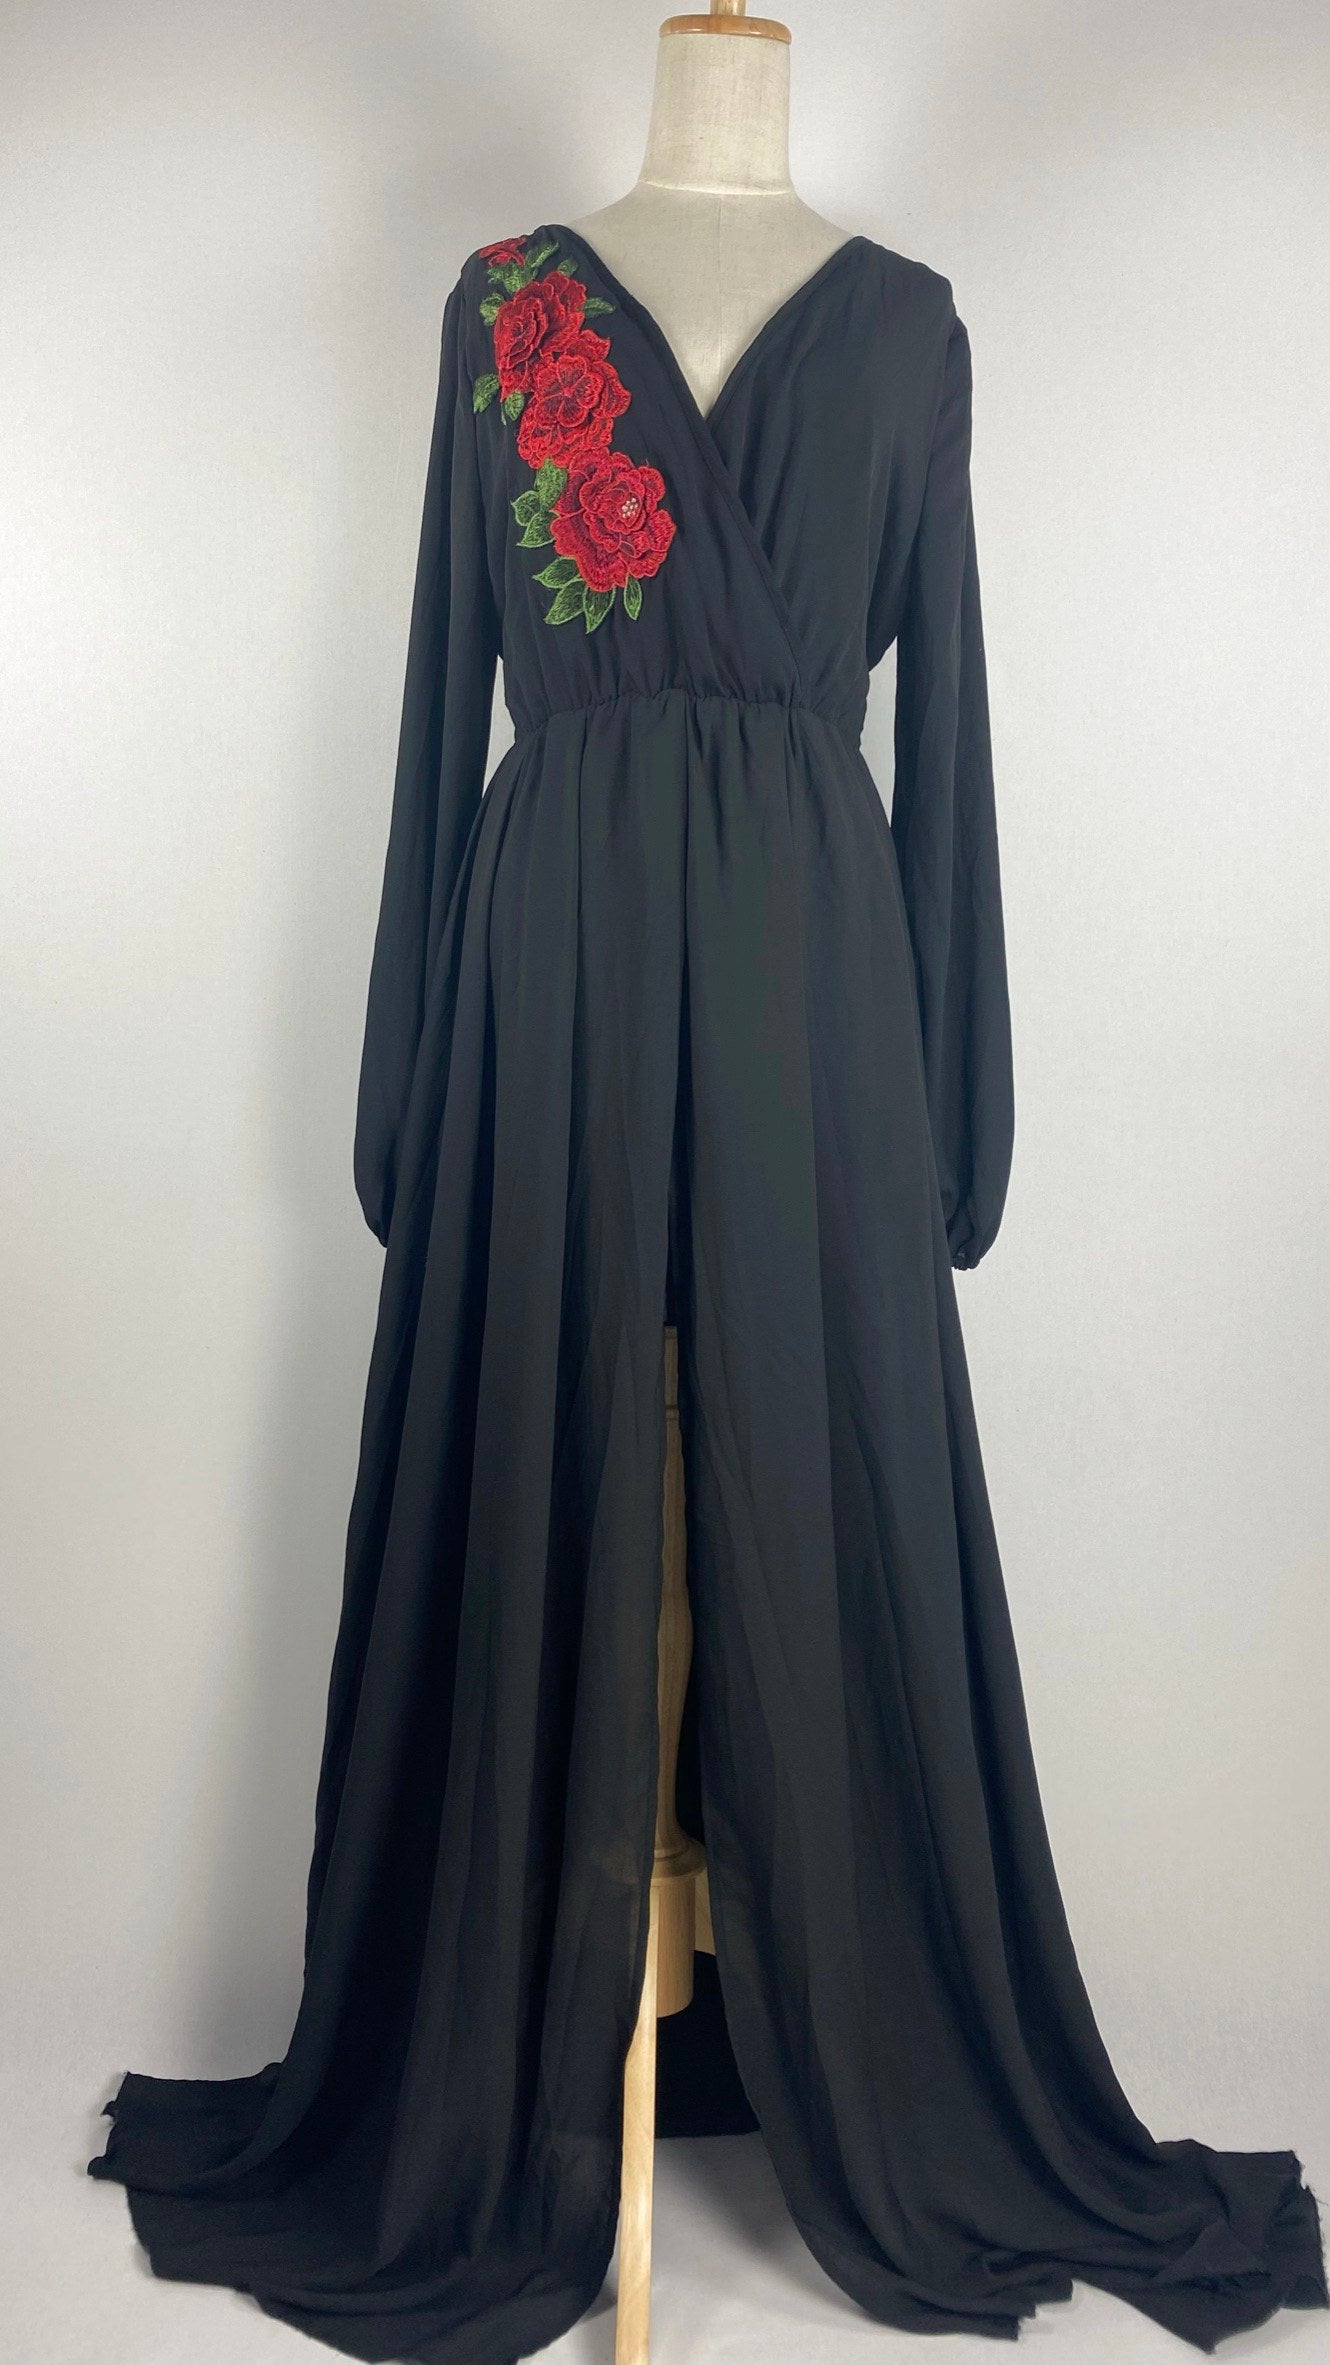 Long Sleeve Maxi Dress with Red Embroidery, Black